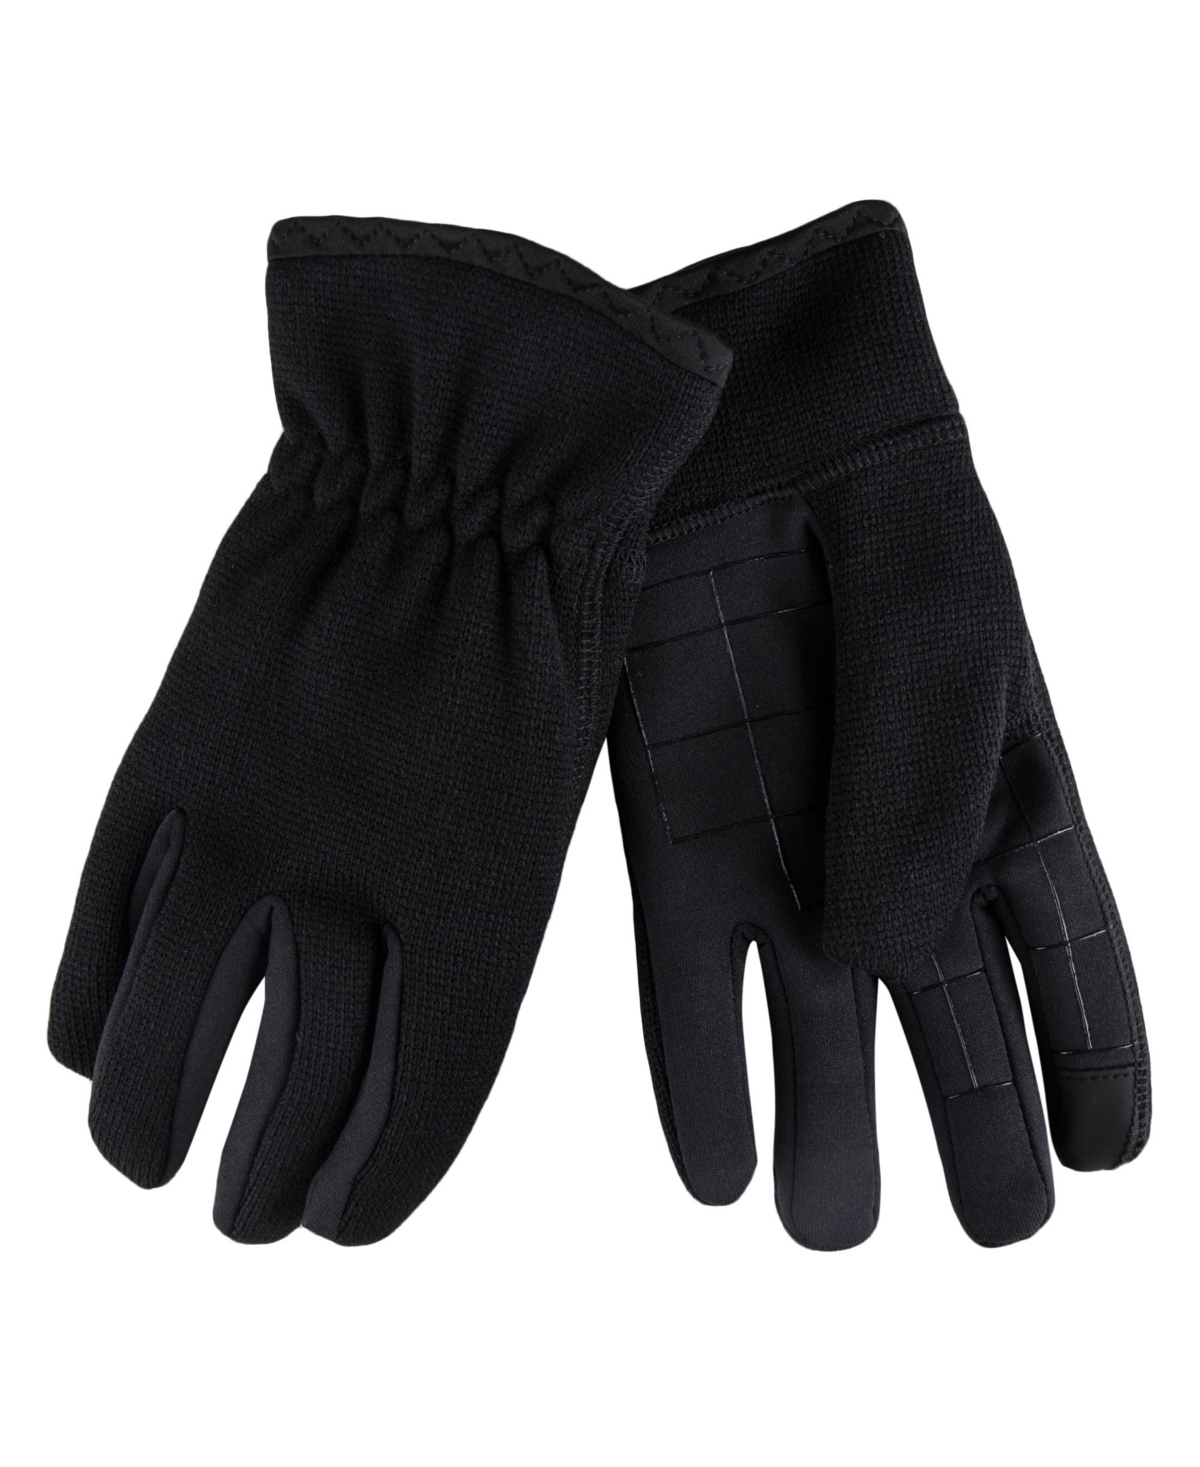 Men's Touchscreen Heathered Knit Gloves with Stretch Palm - Black